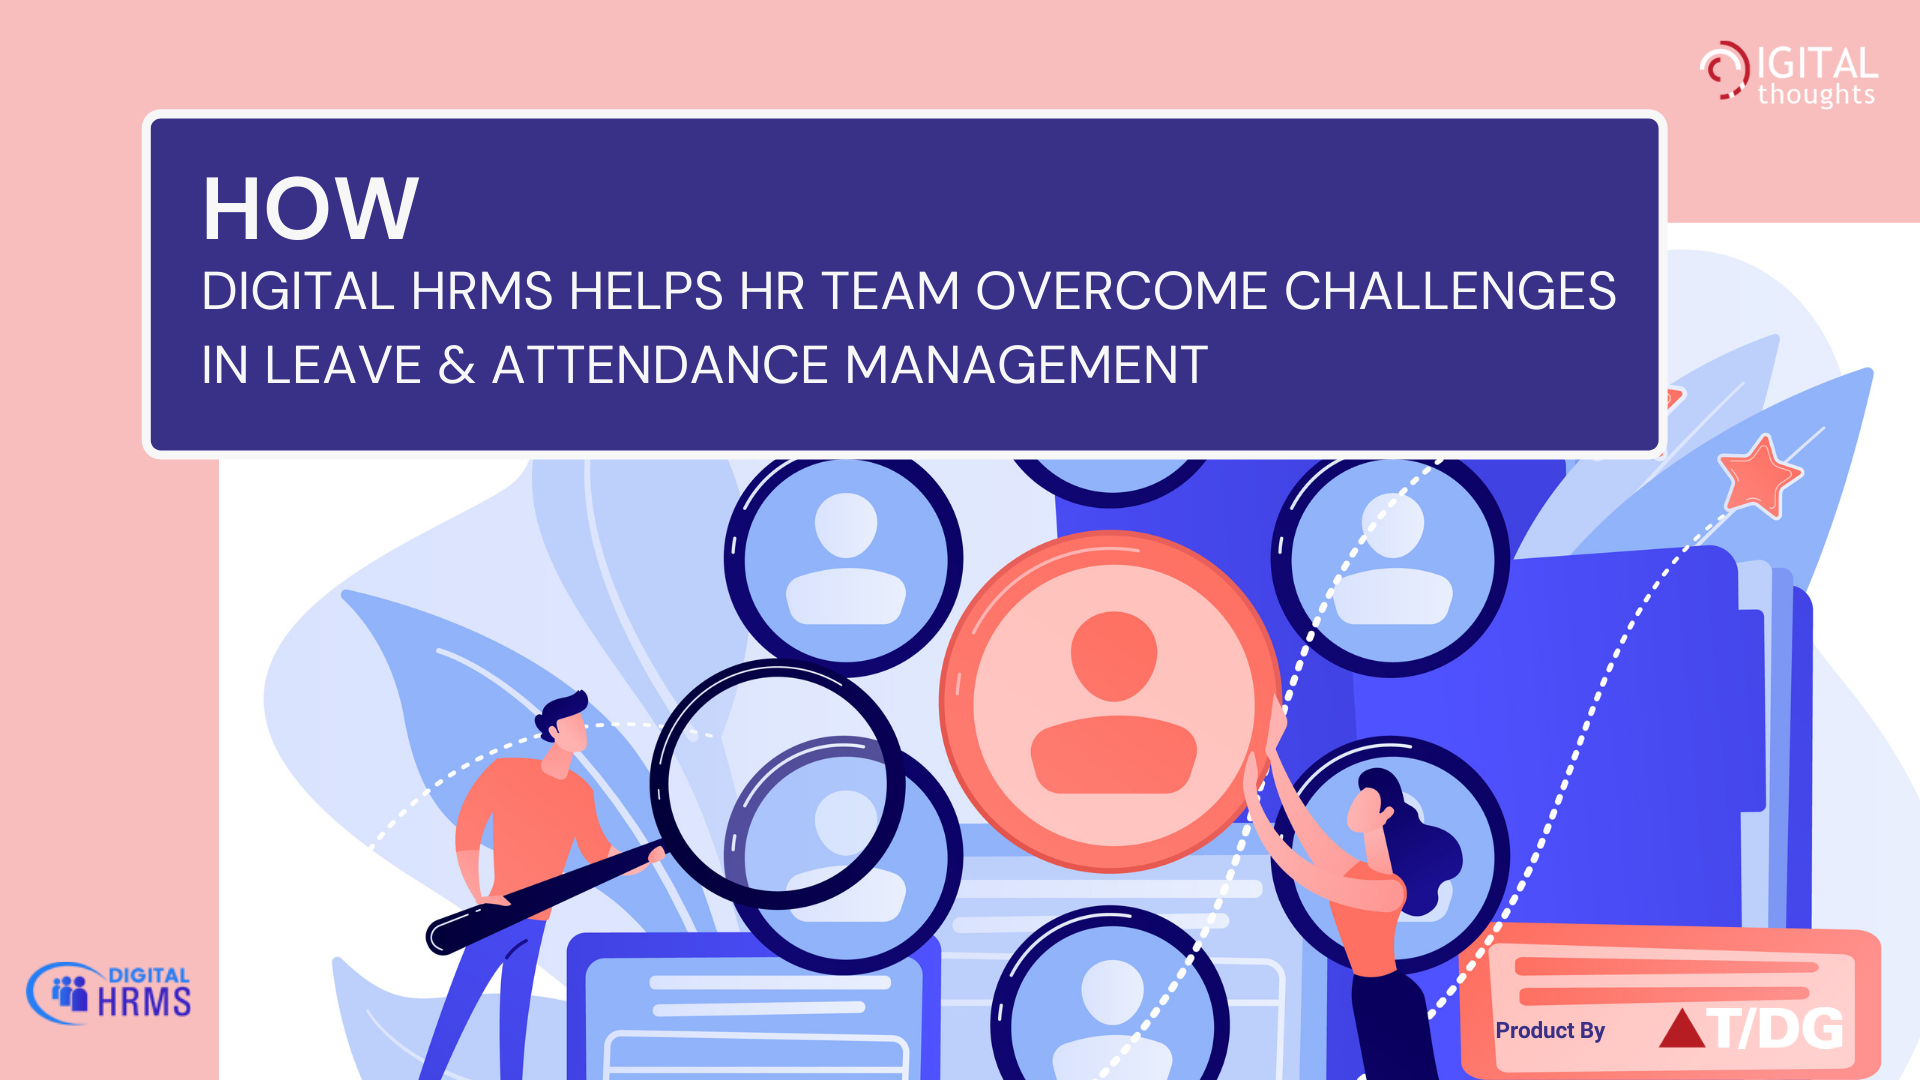 Say Goodbye to Challenges in Leave and Attendance Management with Digital HRMS